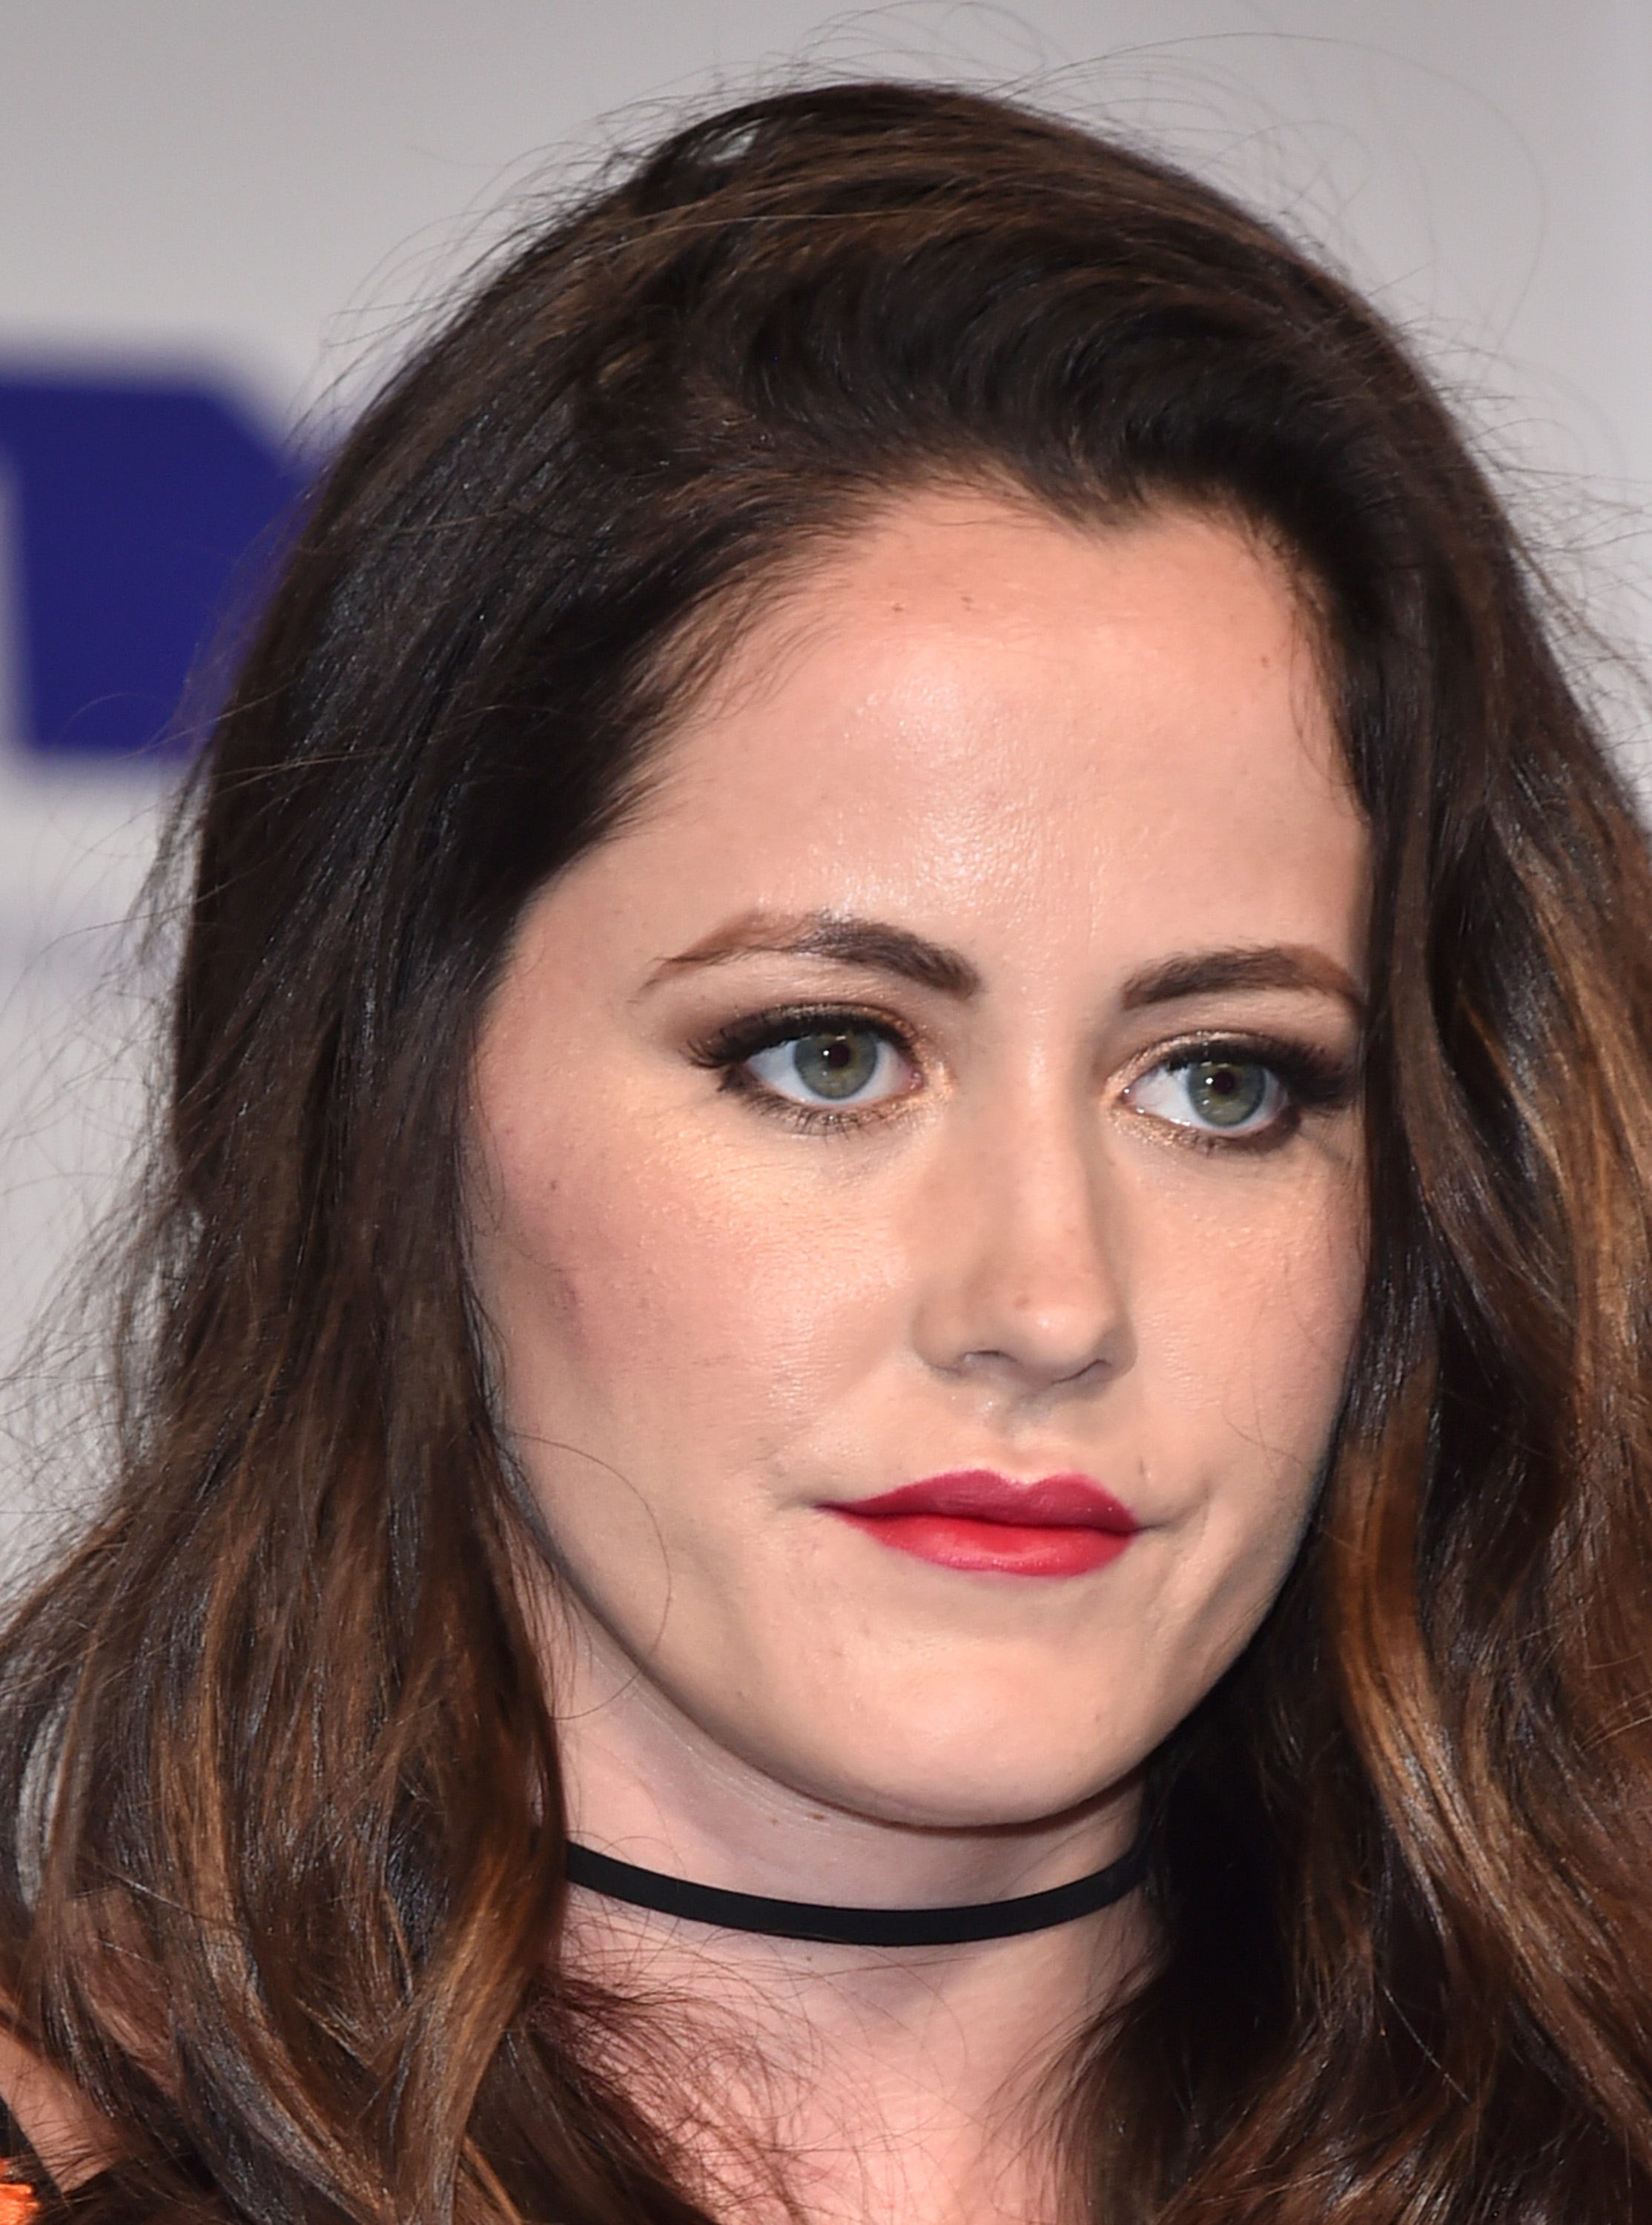 Teen Mom Star Jenelle Evans Pulls Out Gun With Son In The Car During